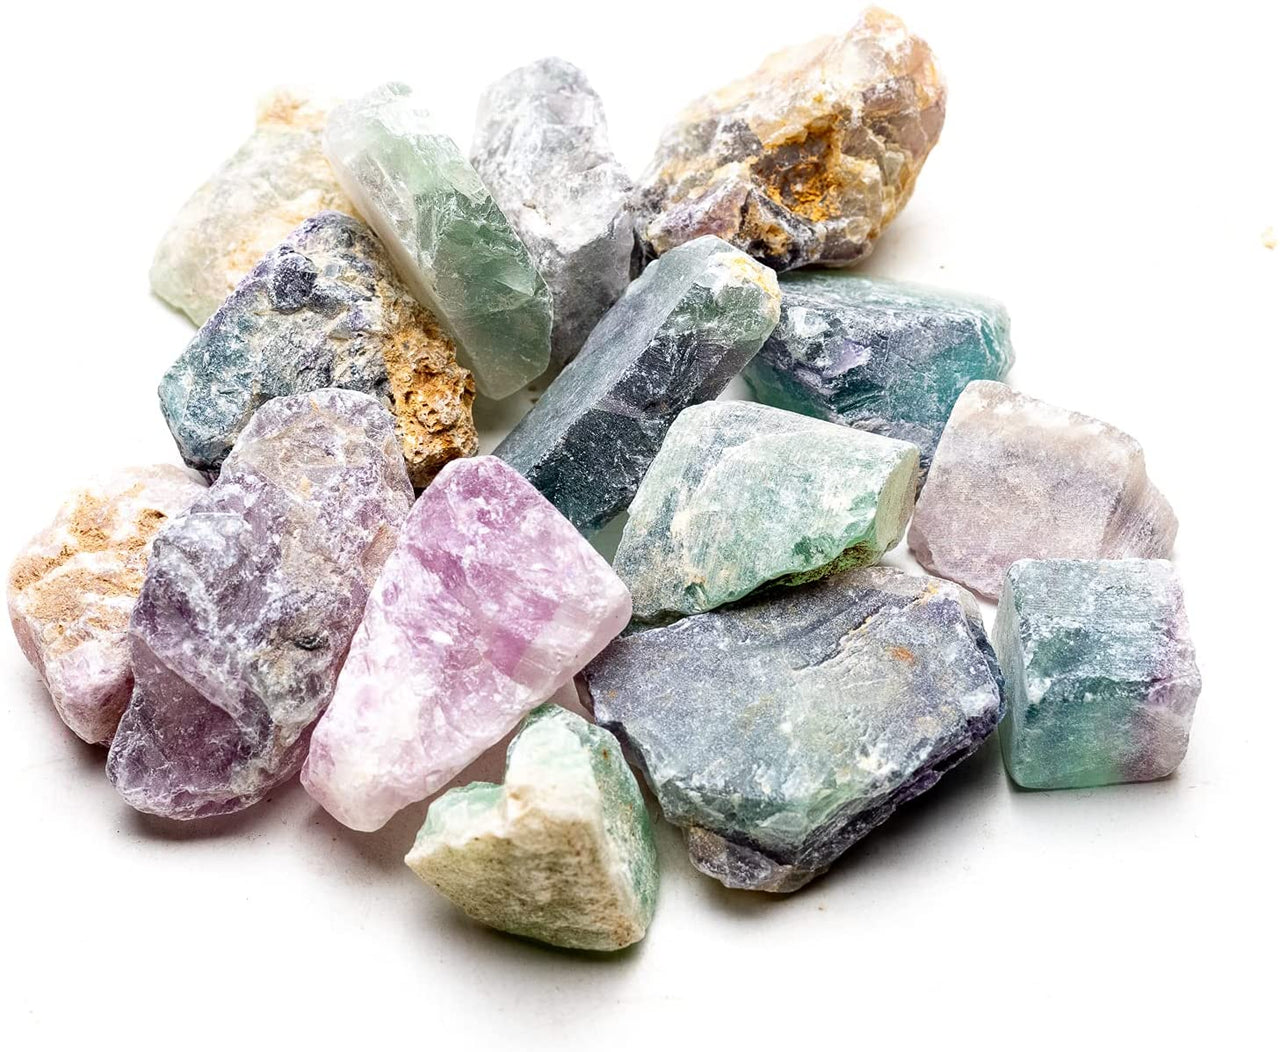 Healing Crystals for Your Home Rock Identification Guide - DesertUSA